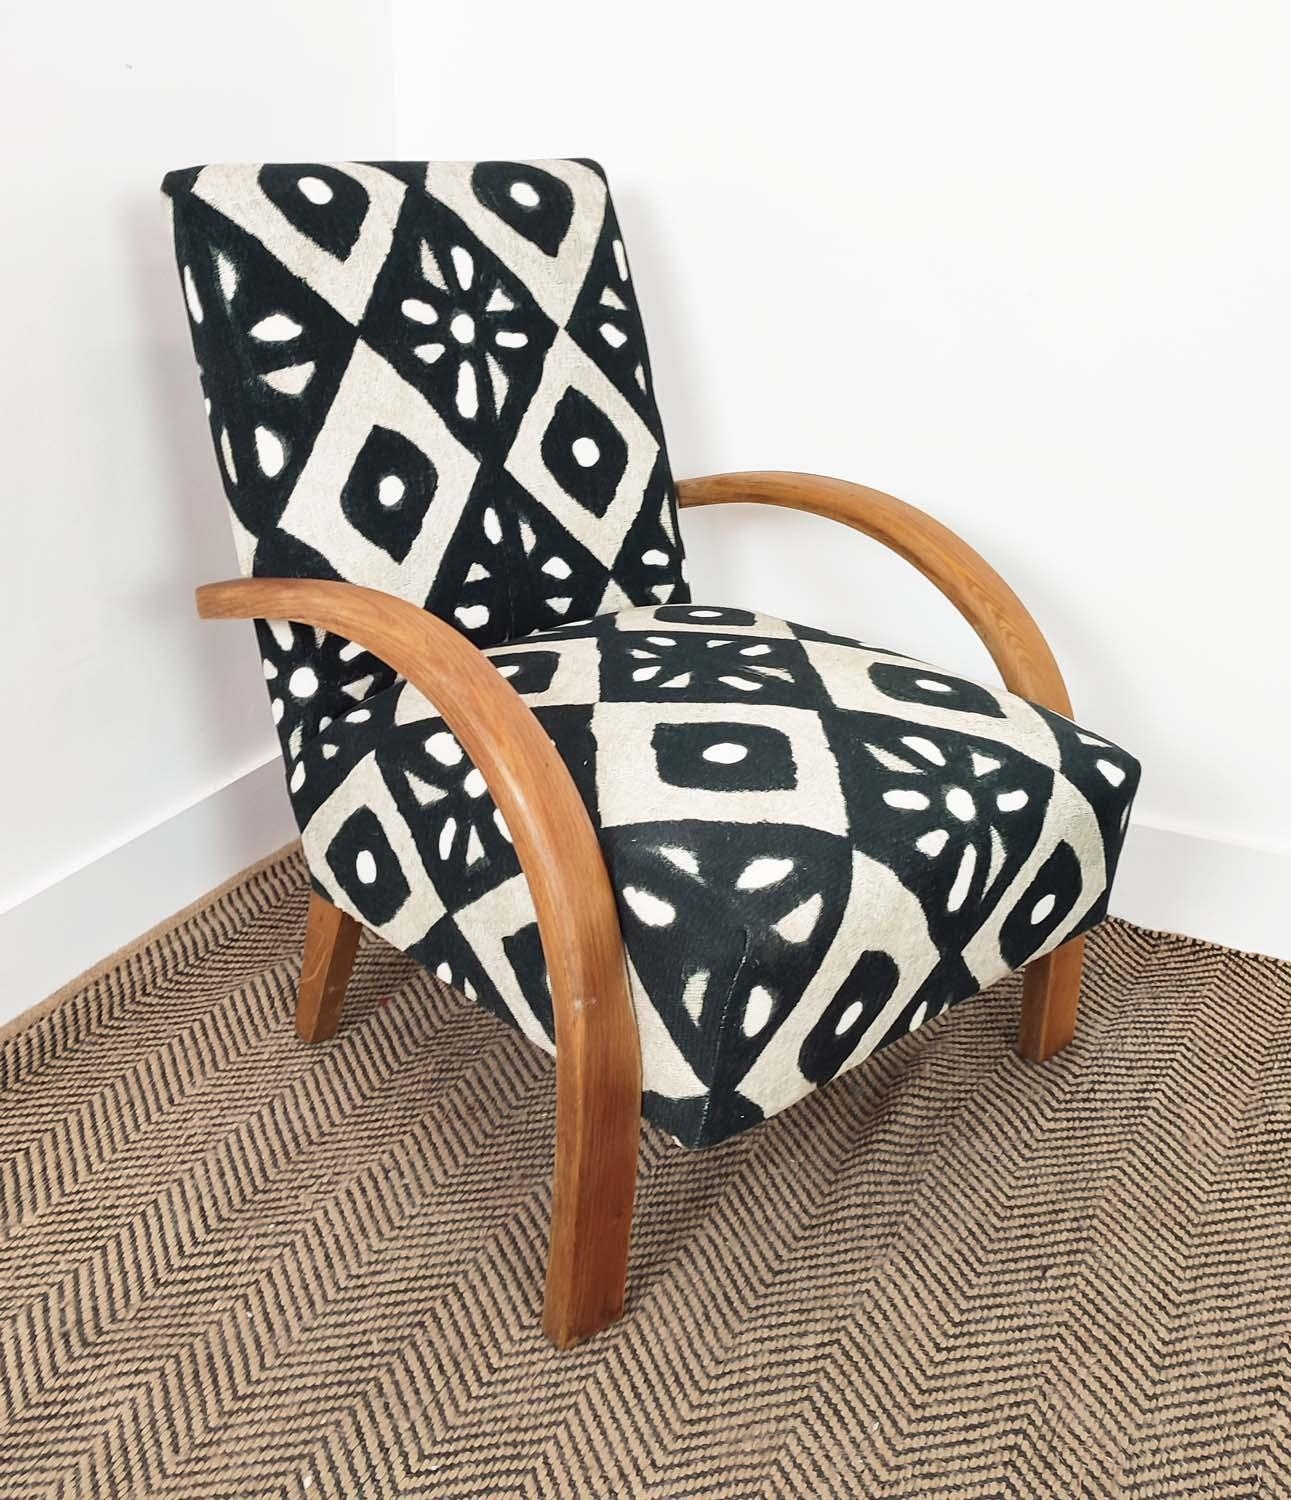 HALBALA ARMCHAIR, mid 20th century bentwood in black and white geometric material, 77cm H x 60cm W x - Image 2 of 10